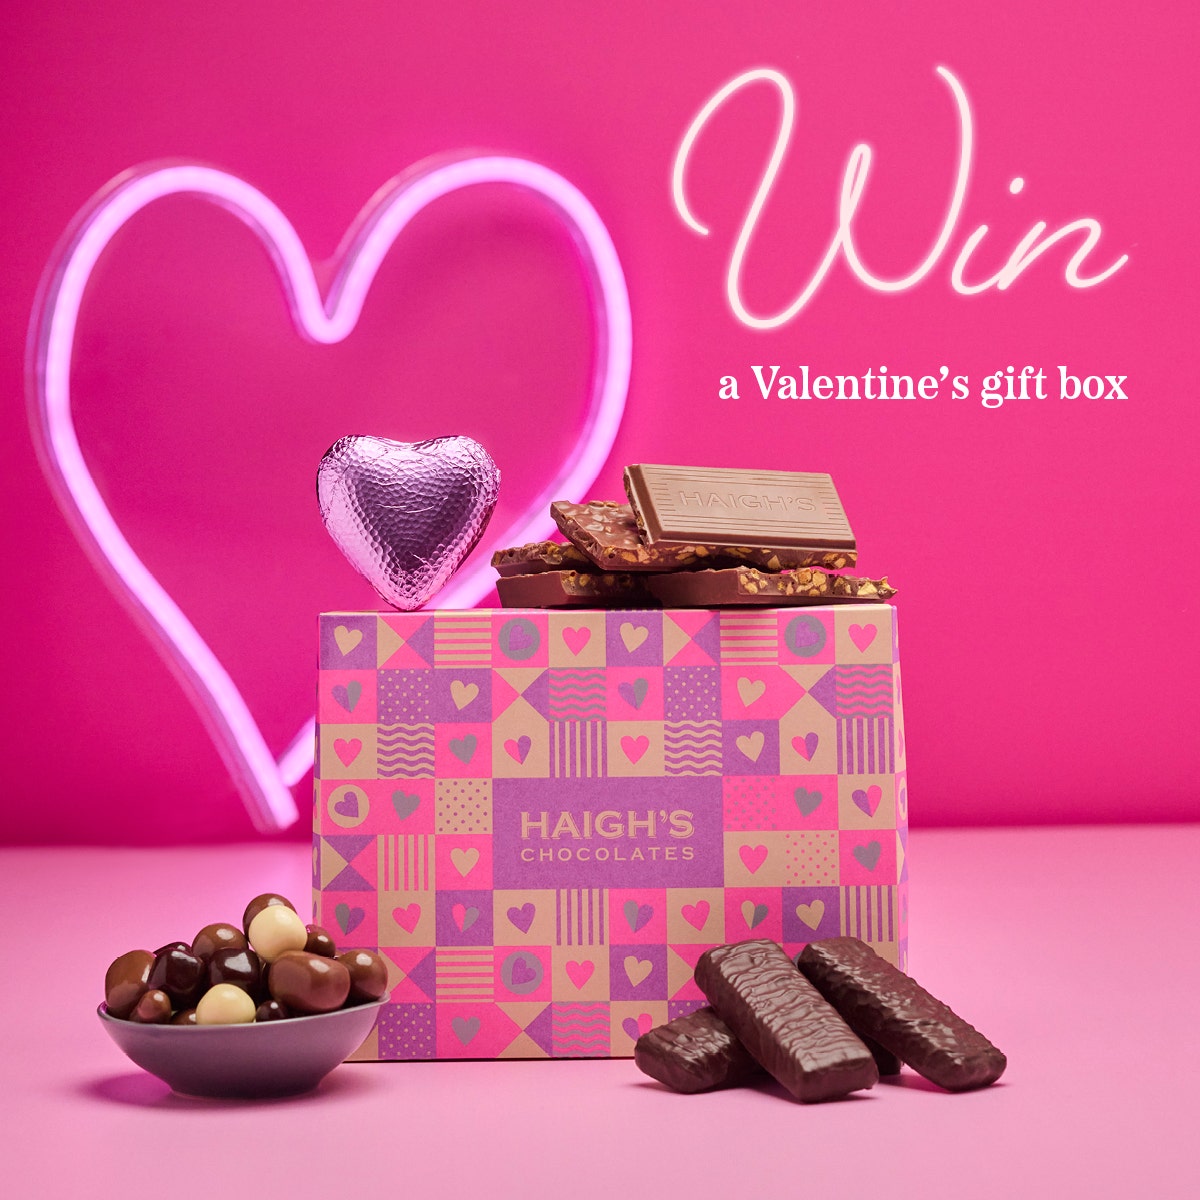 Valentine's Day Gift Boxes to be won